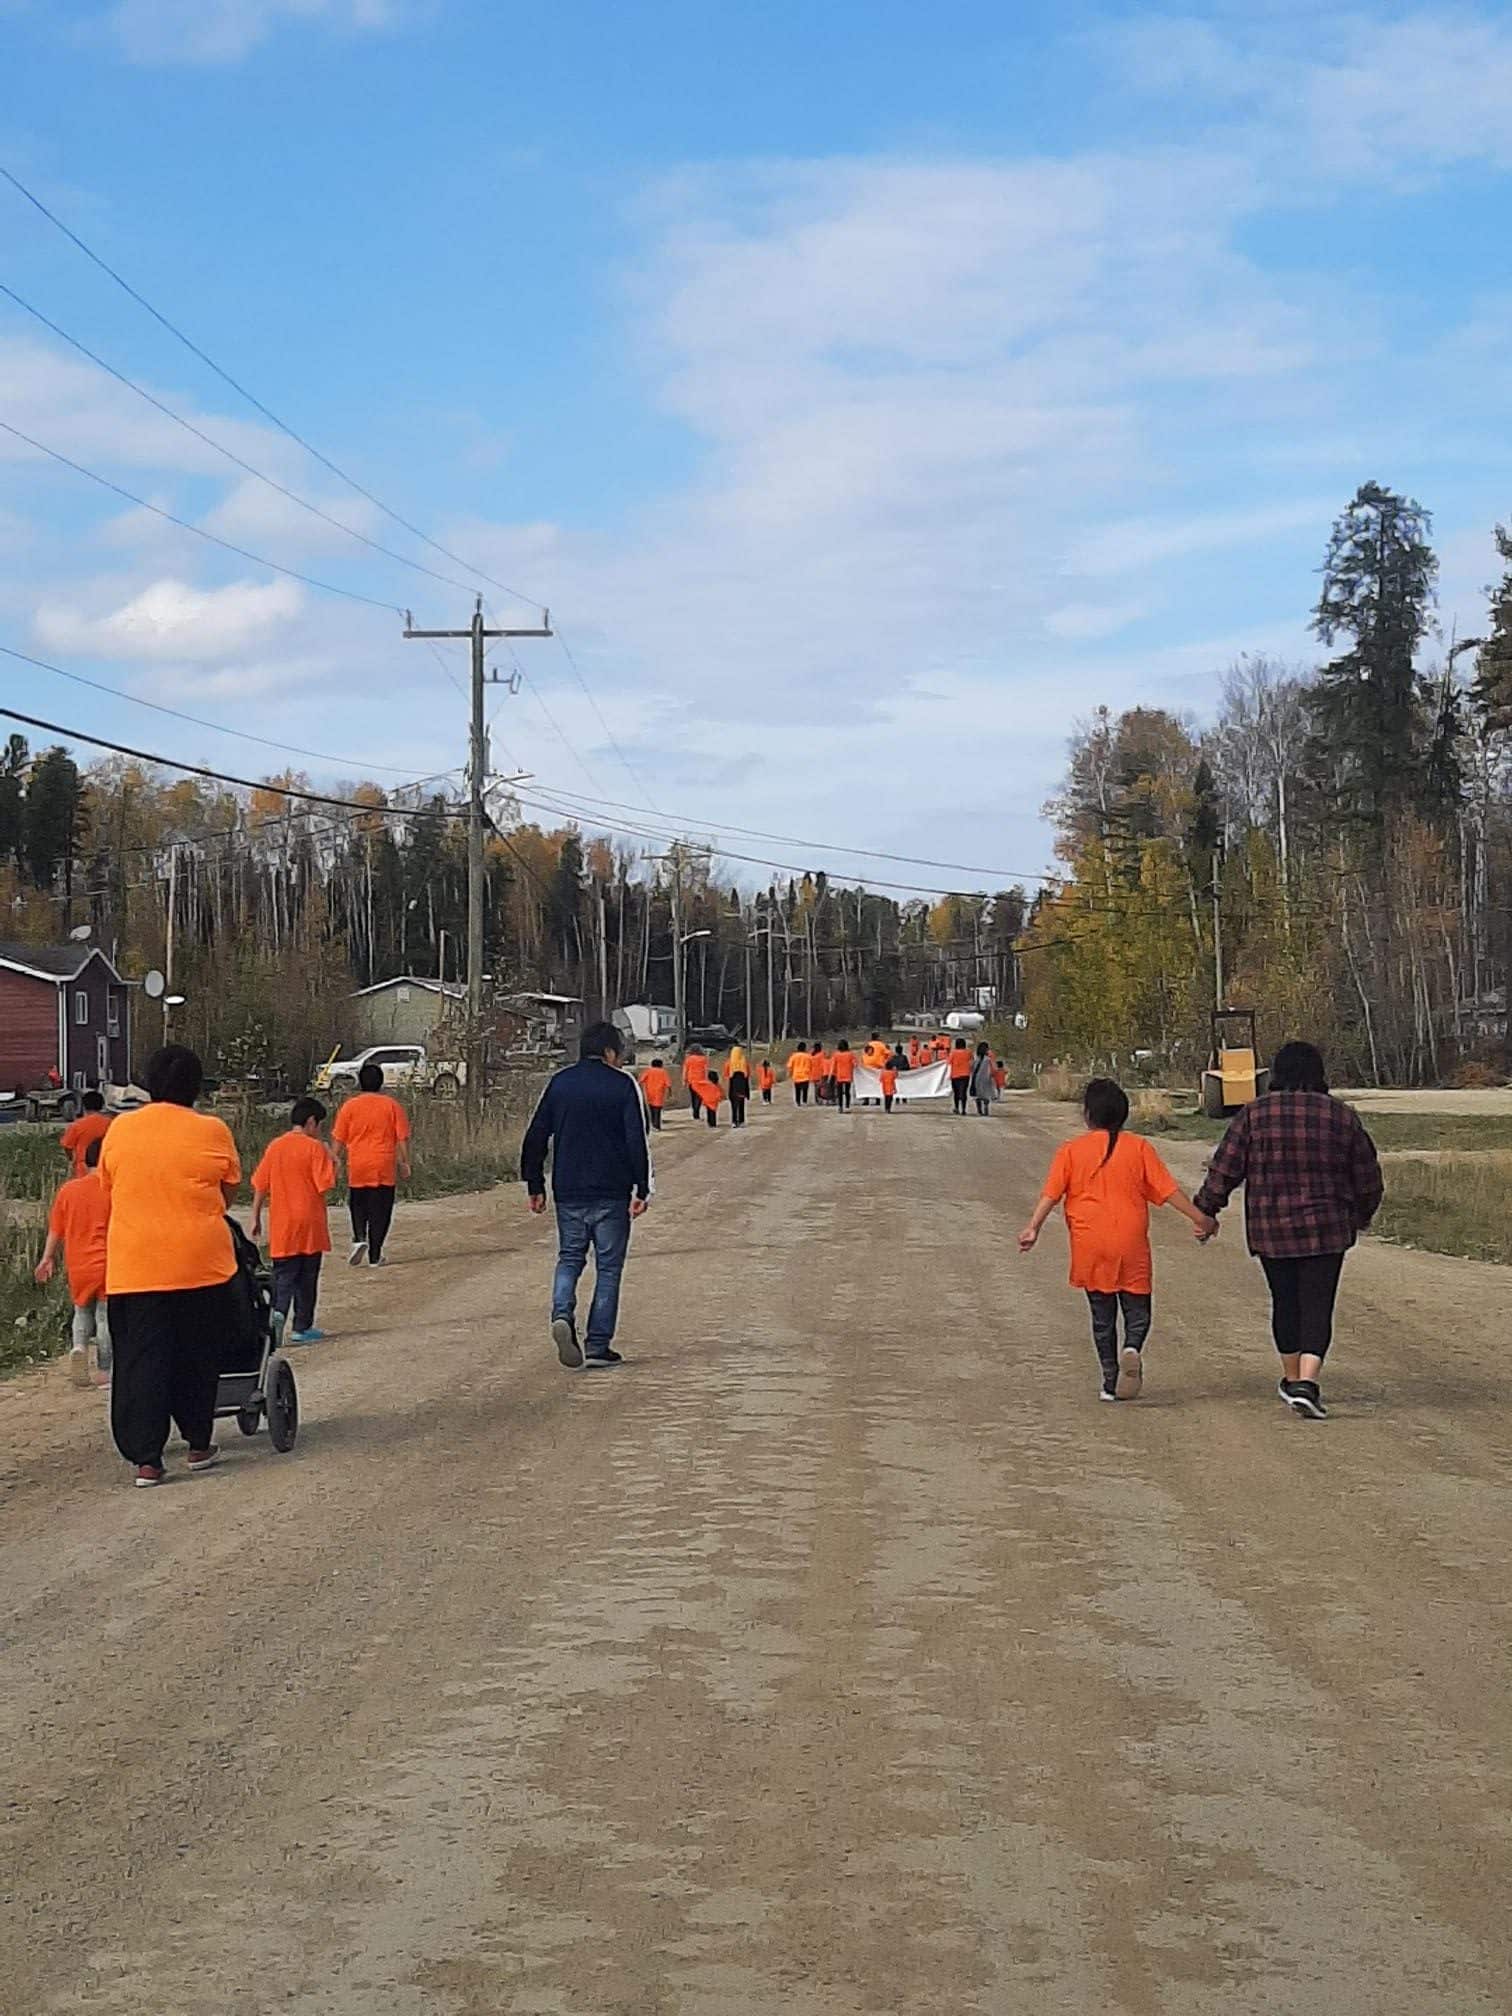 A group of people in orange shirts walking down a dirt road.